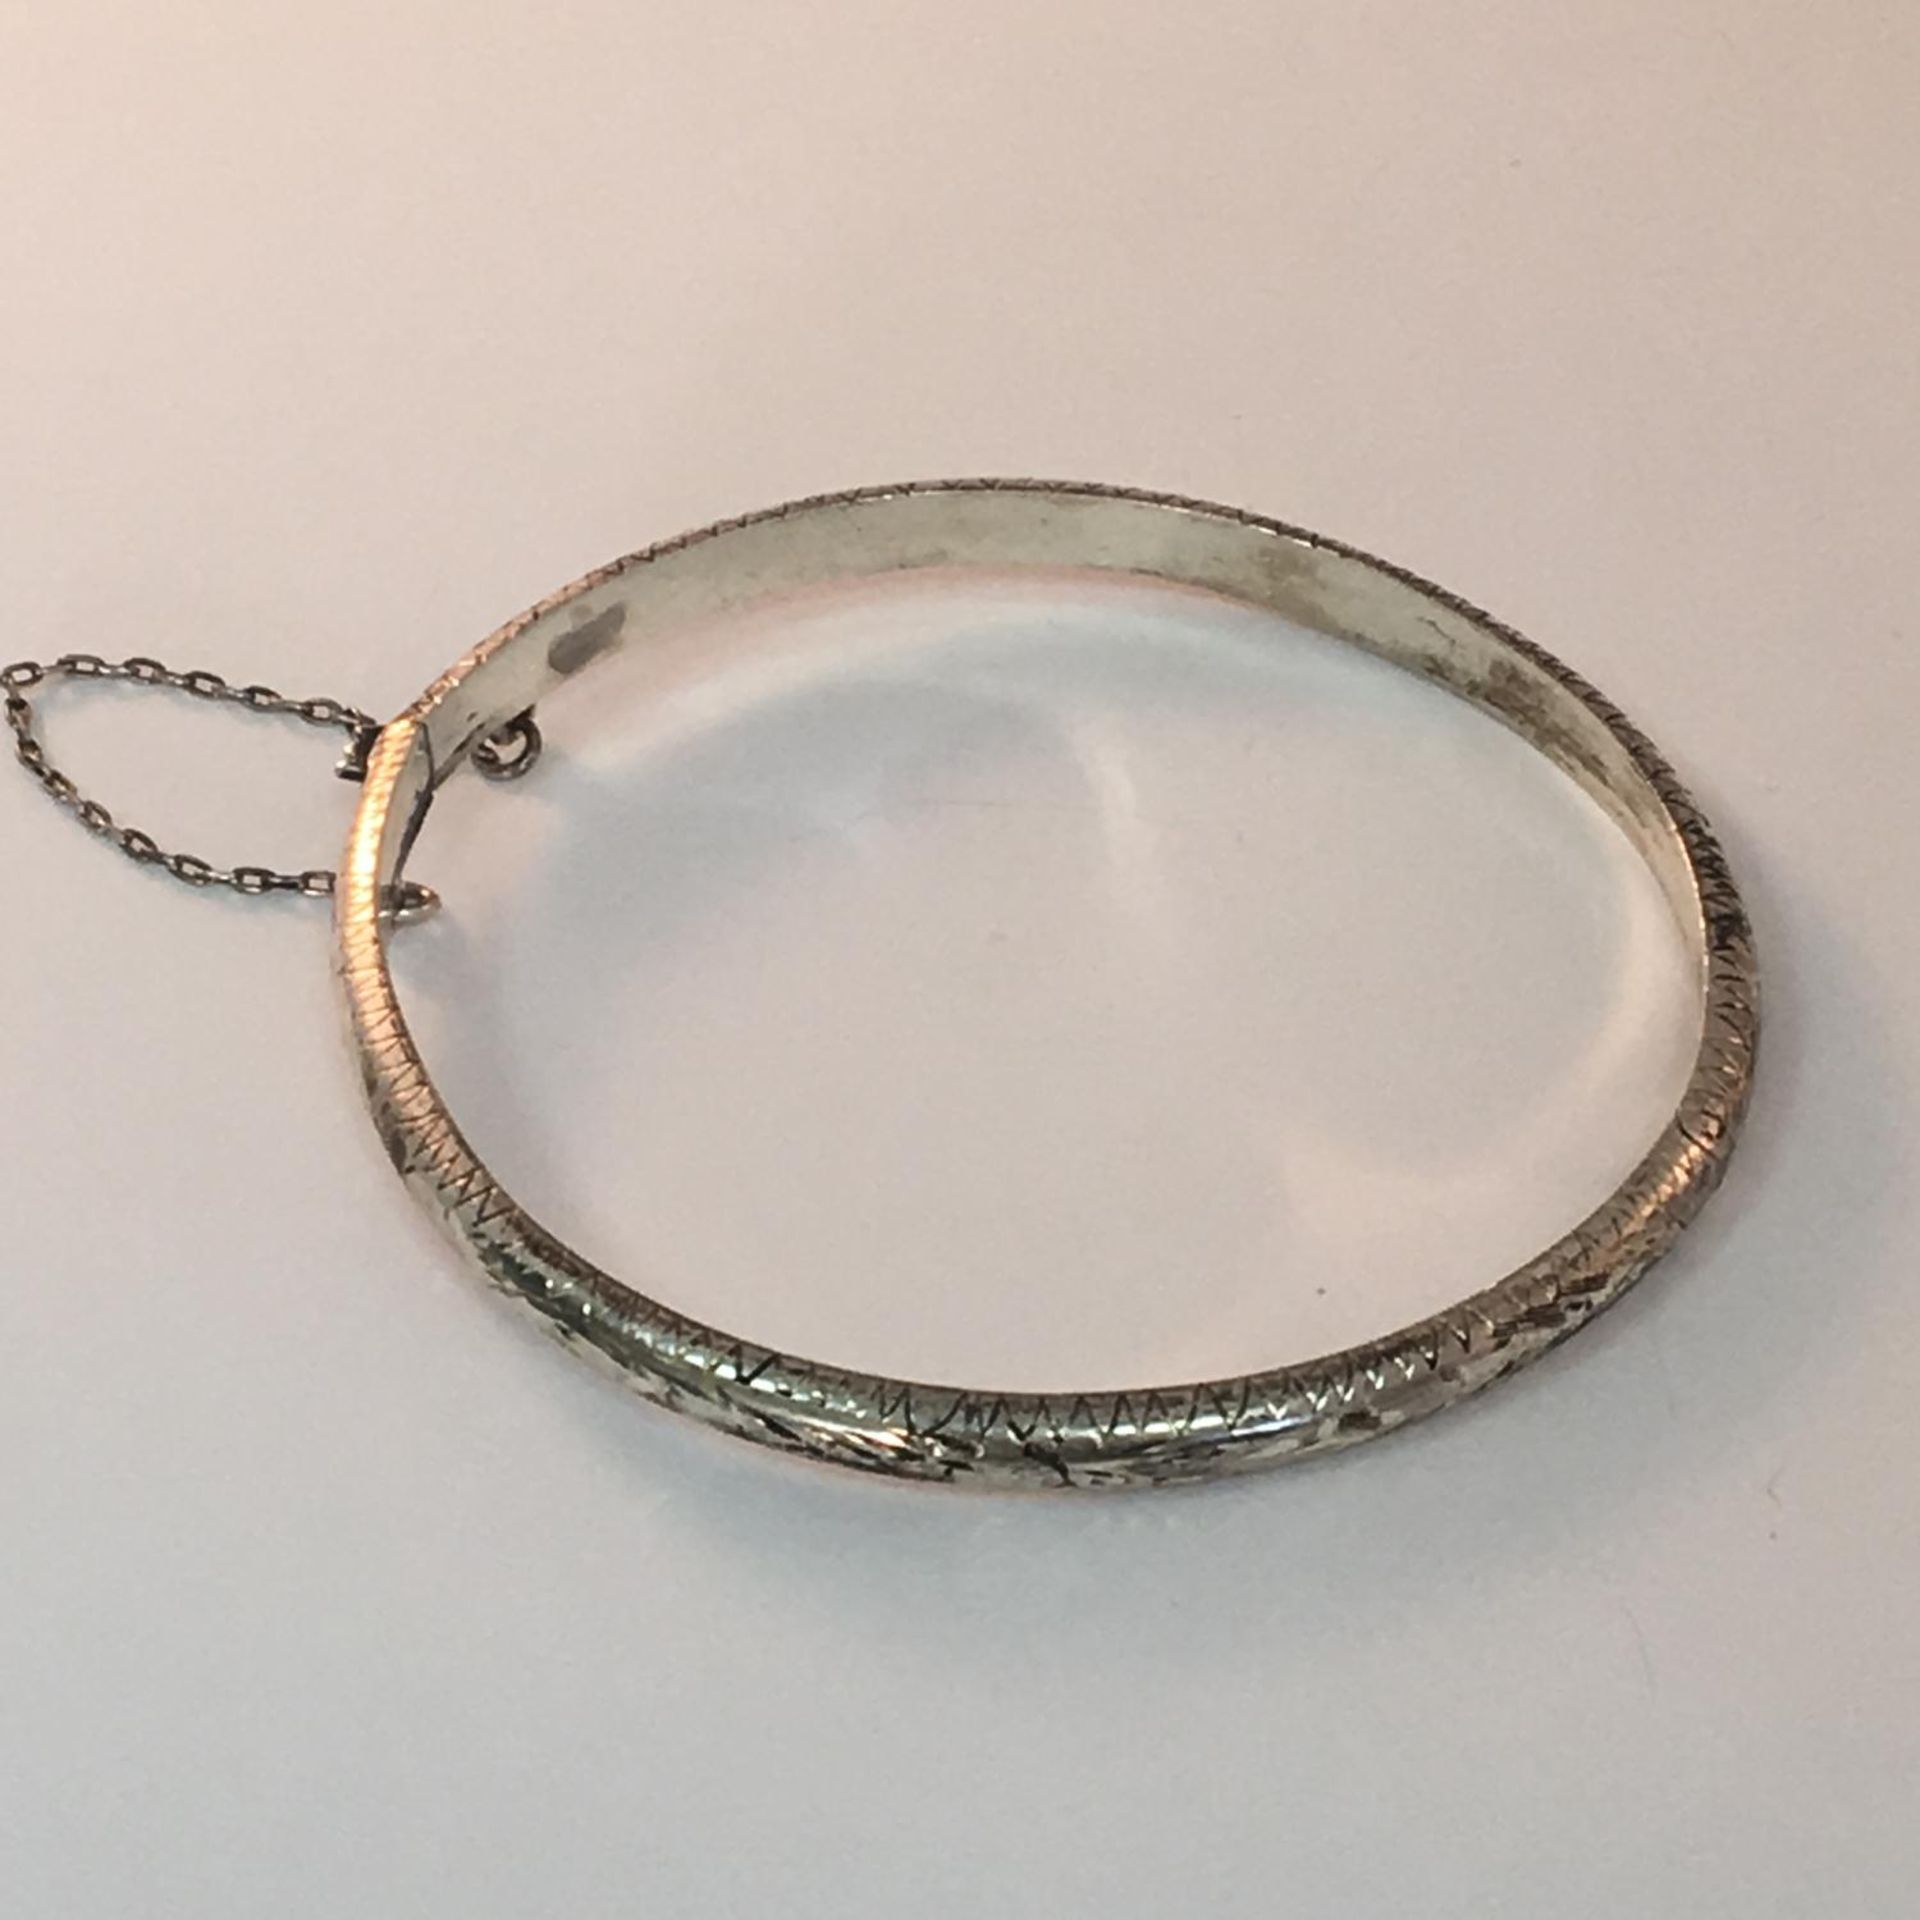 Vintage silver hinged bangle with safety chain, stamped 925